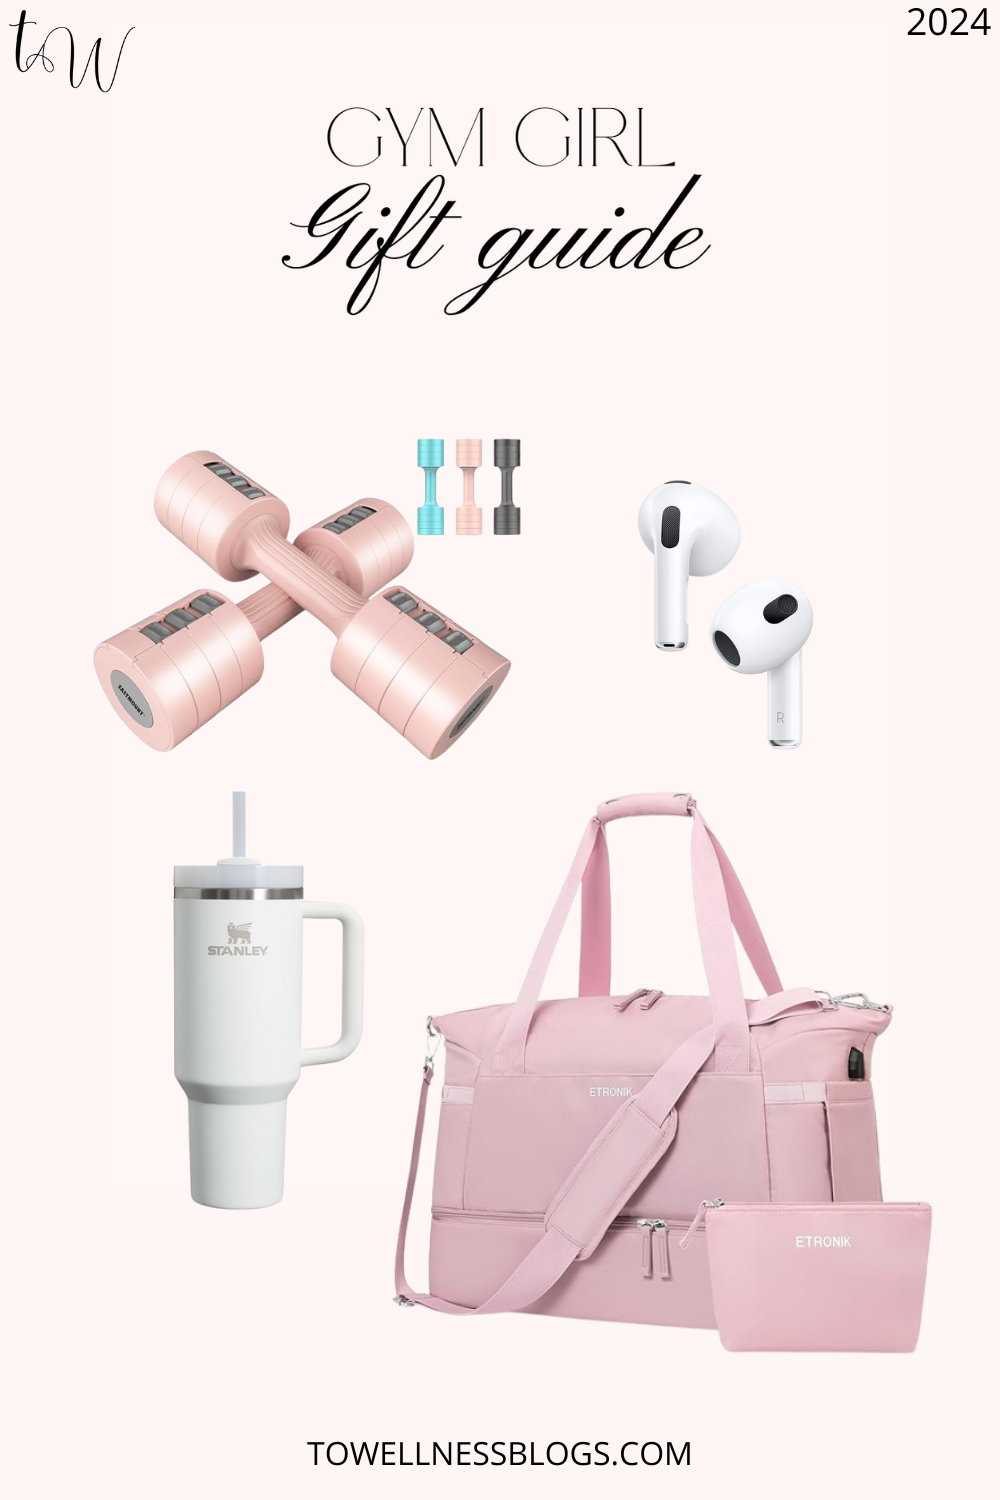 GIFT GUIDE: for a Gym Girl